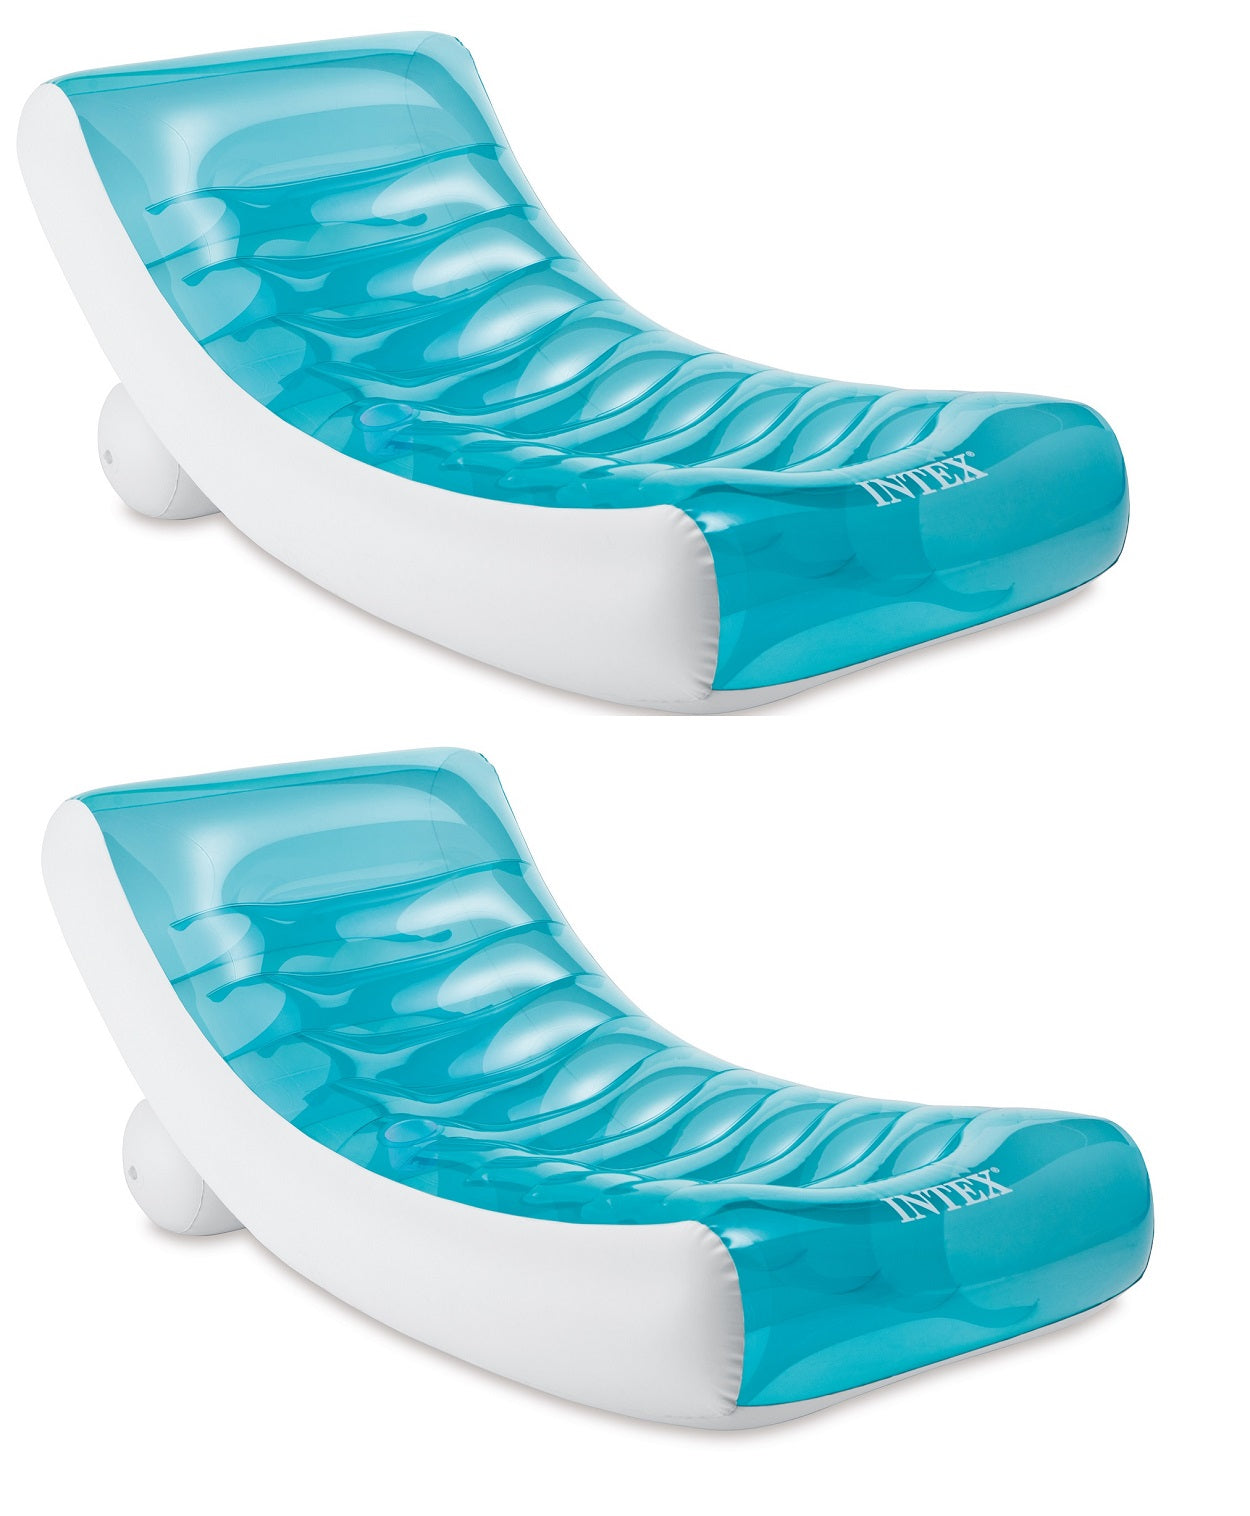 Intex Inflatable Rockin' Lounge Pool Floating Raft Chair with Cupholder 2-Pack